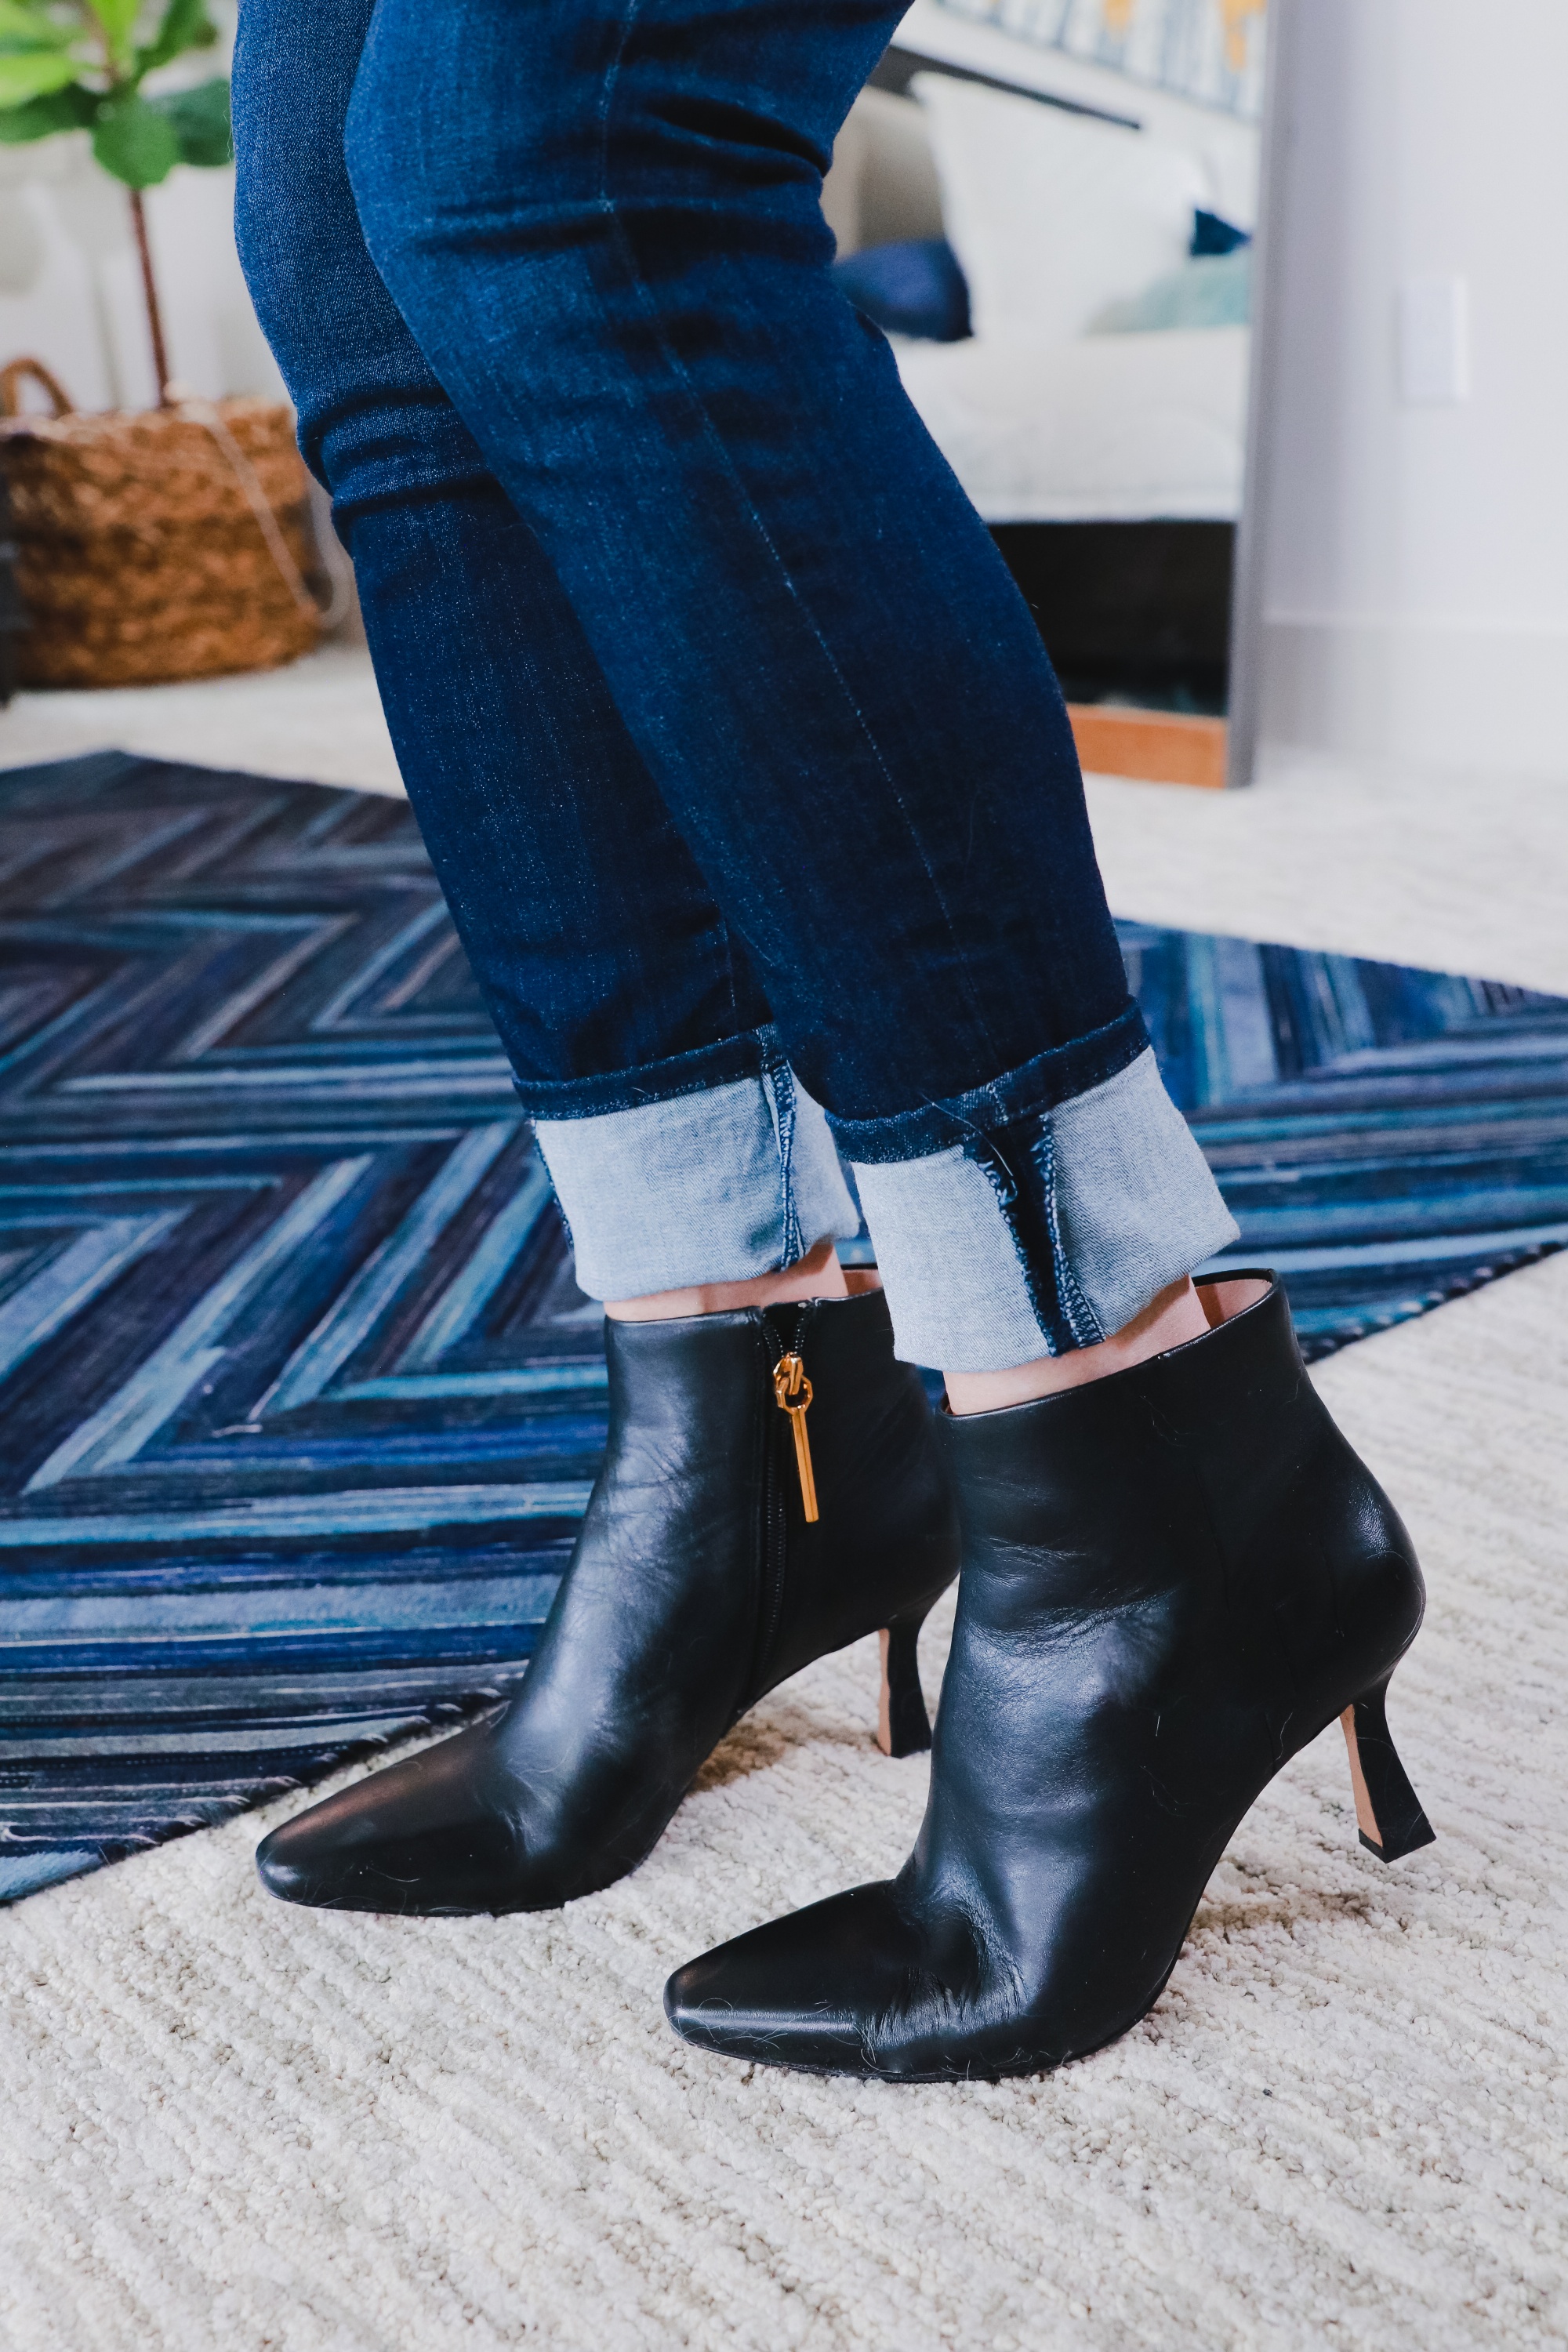 how to cuff skinny or straight leg jeans to wear with ankle booties, fashion blogger wearing black ankle boots with straight leg blue jeans